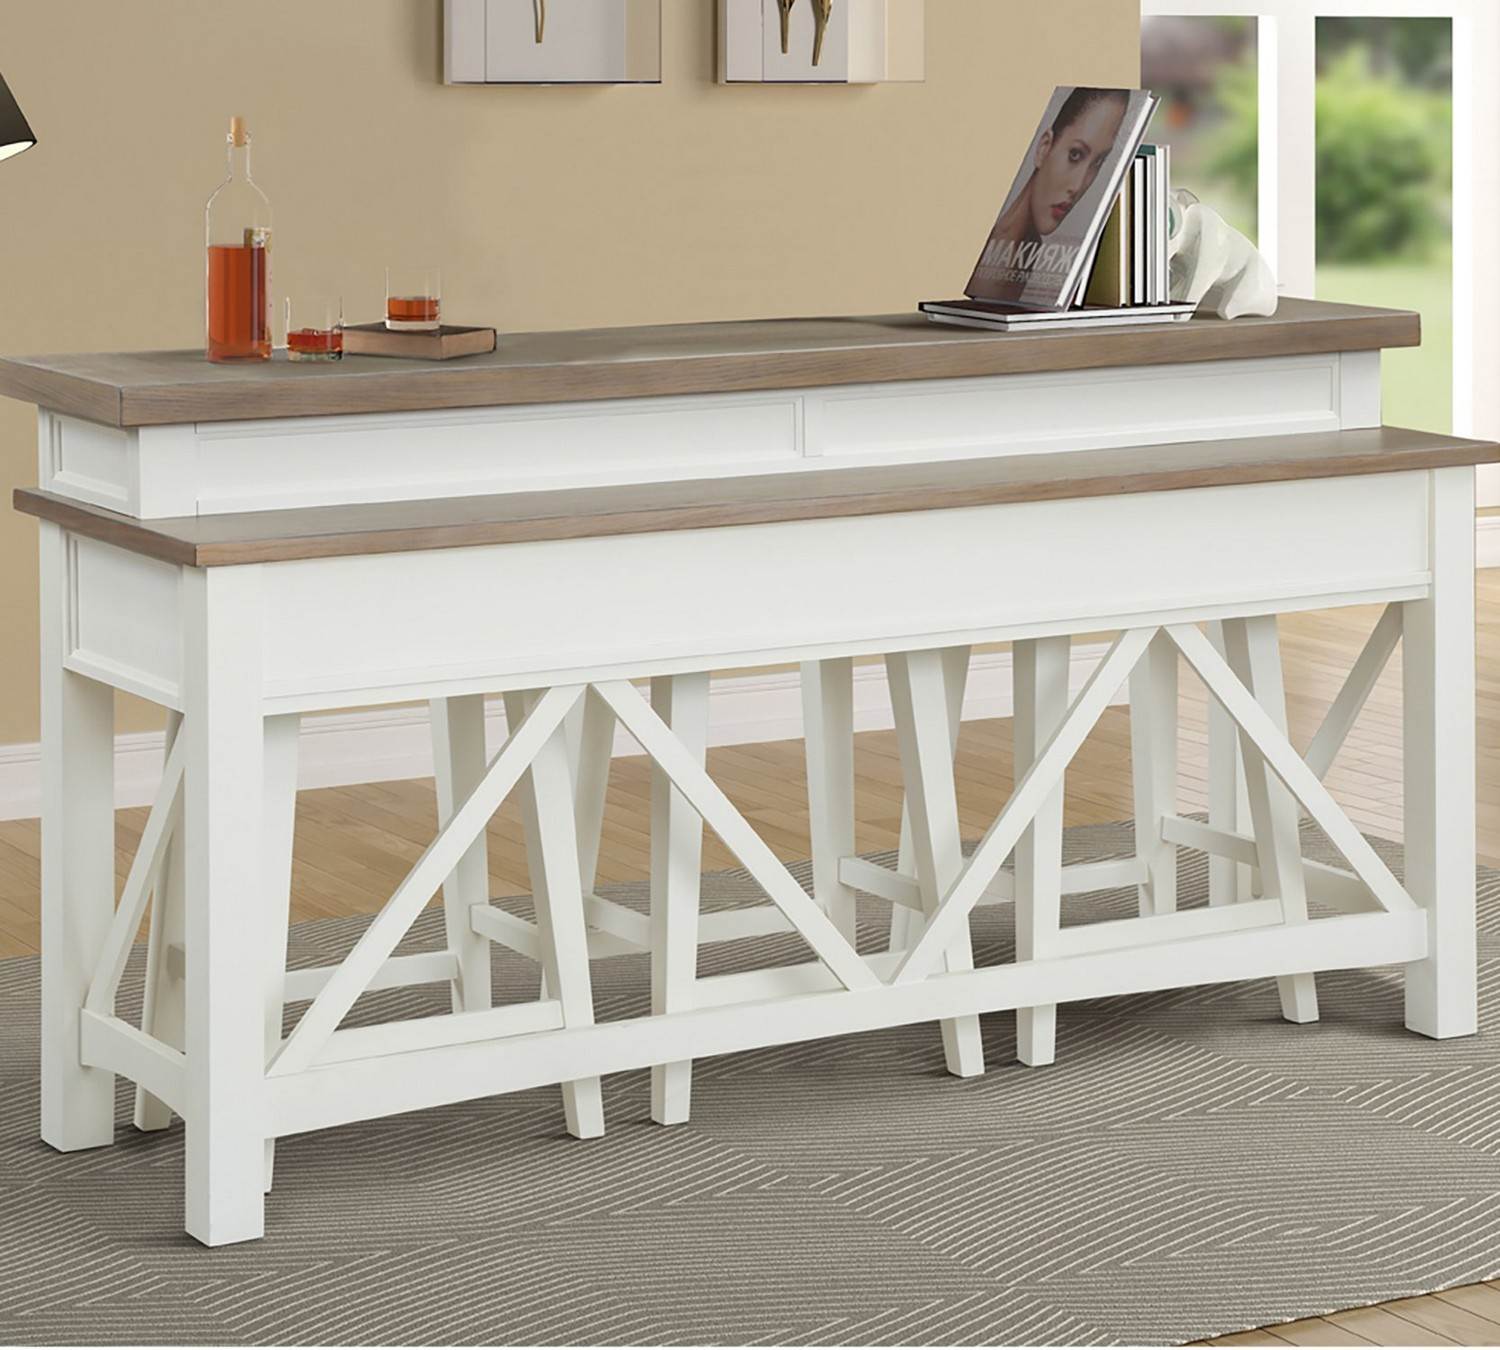 Parker House Americana Modern Everywhere Console with 3 Stools - Cotton